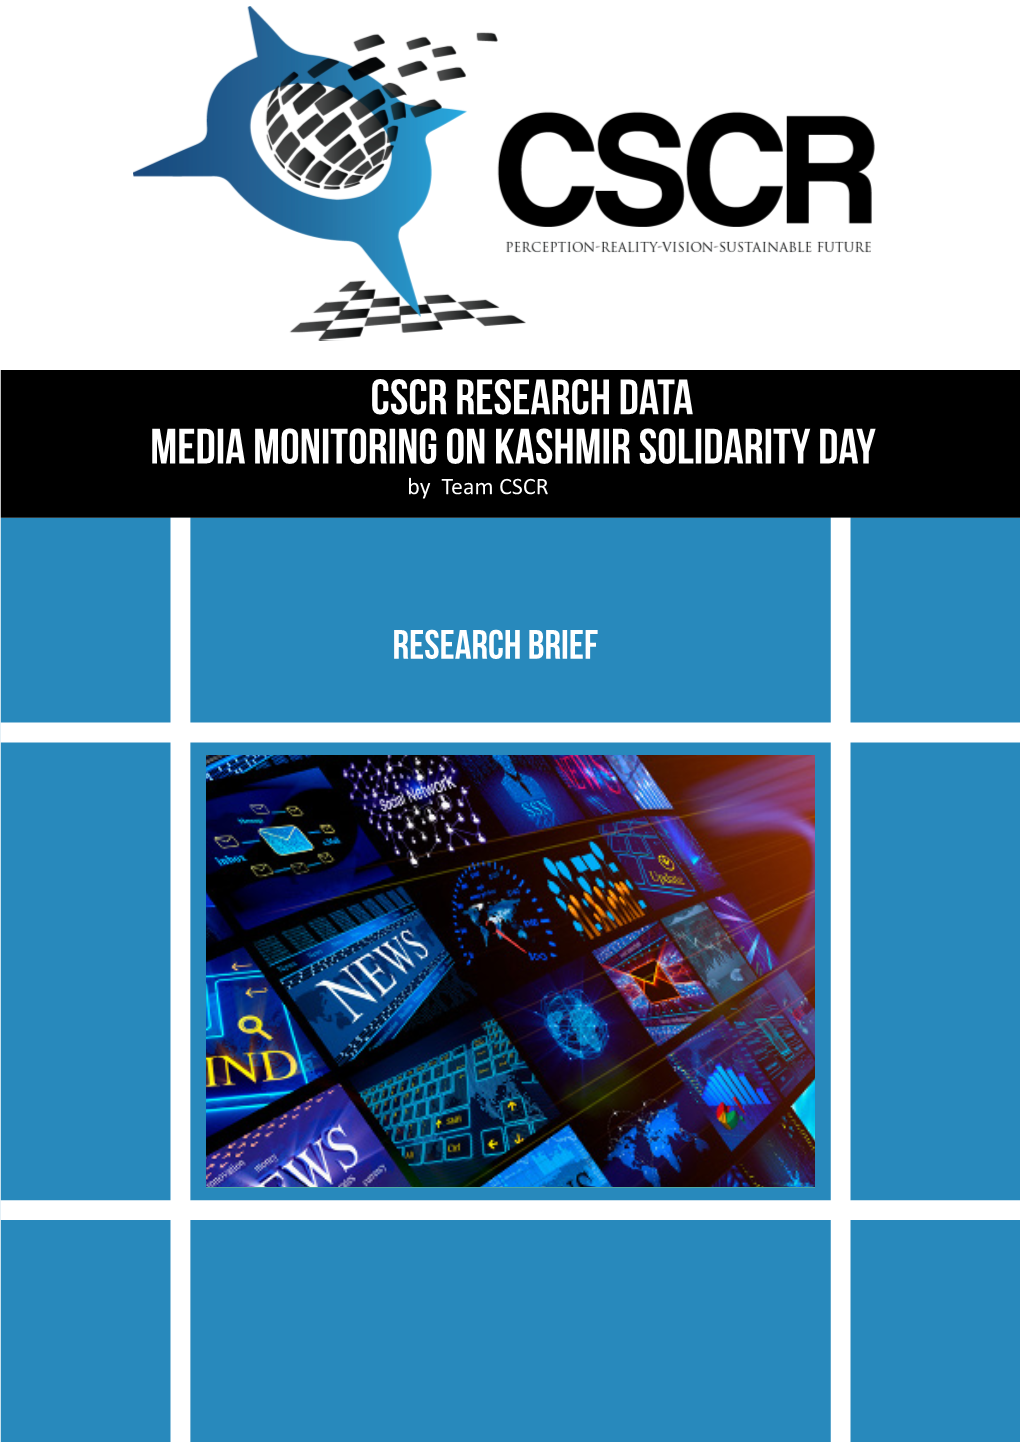 CSCR Research Data Media Monitoring on Kashmir Solidarity Day by Team CSCR